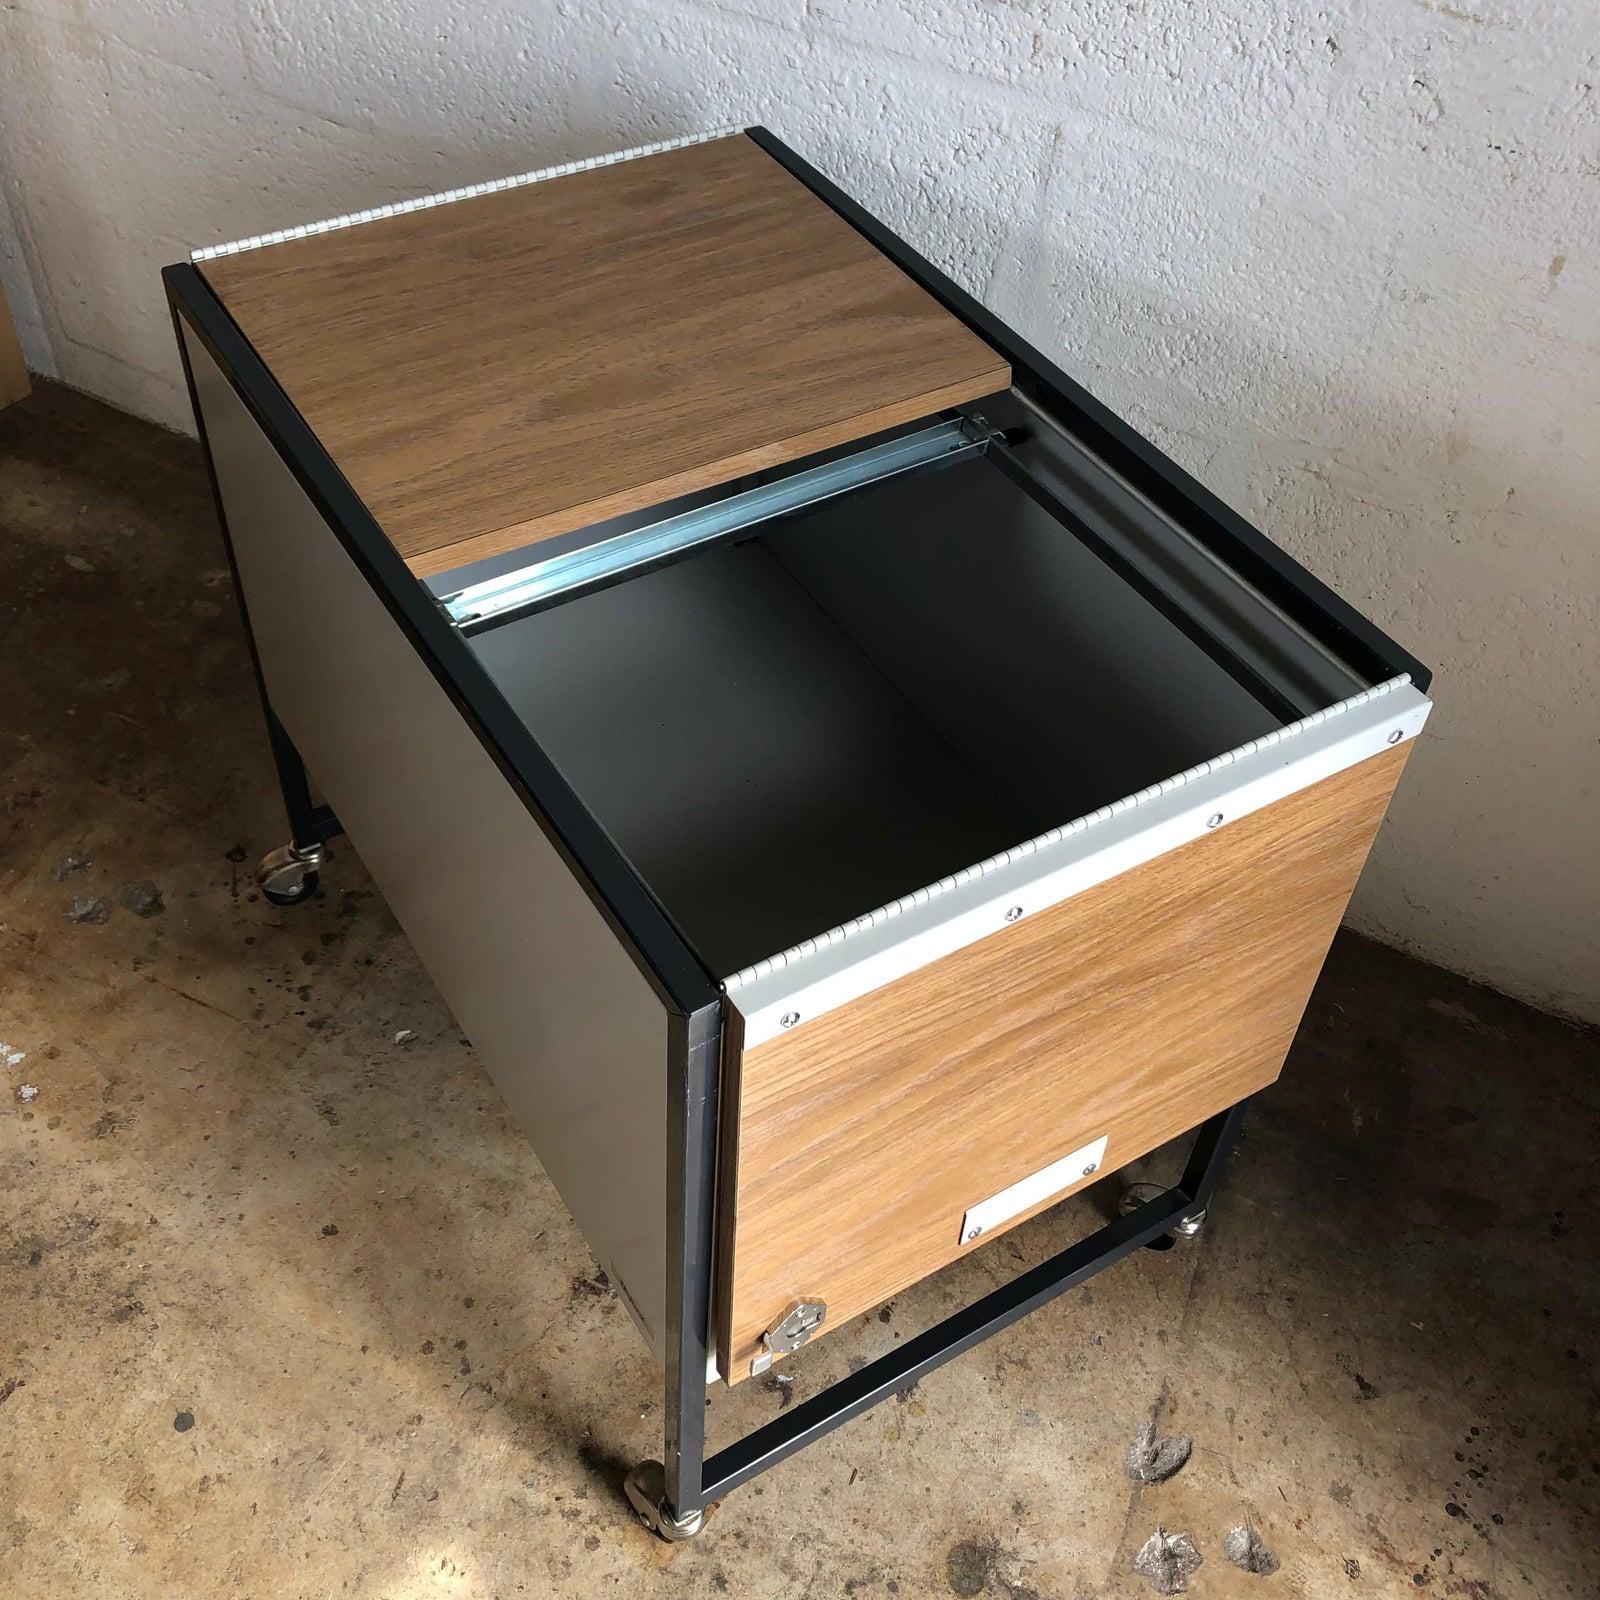 British Vintage Midcentury Industrial Filing Cabinet/ Cart by Oxford from the 1970s